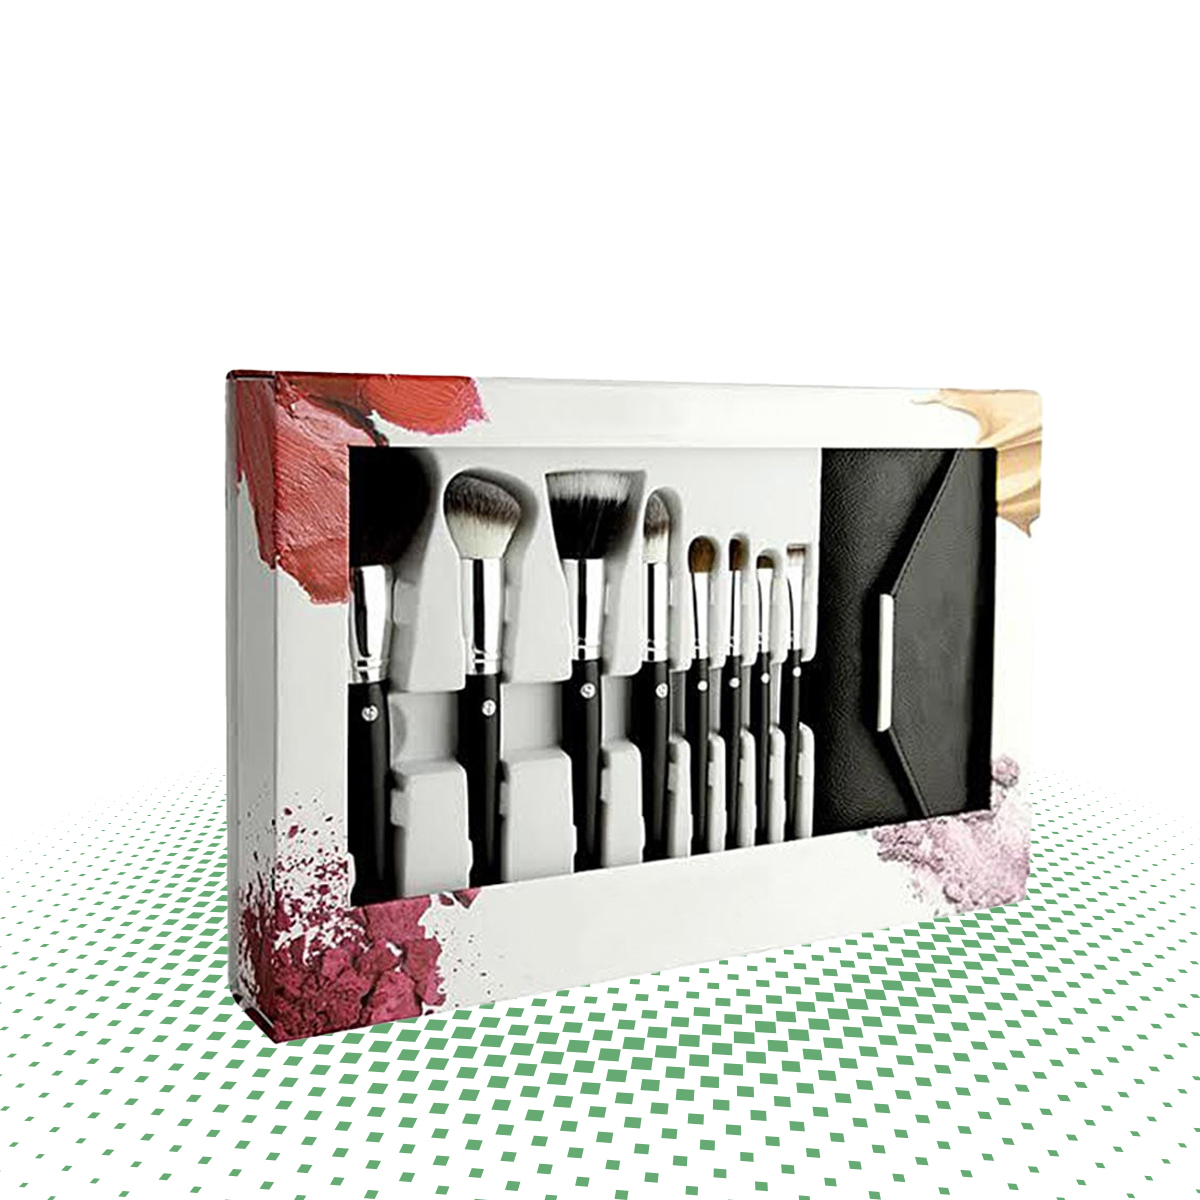 Get Custom Beauty Products Boxes In Bulk  Go Safe Packaging - Texas - Arlington ID1537665